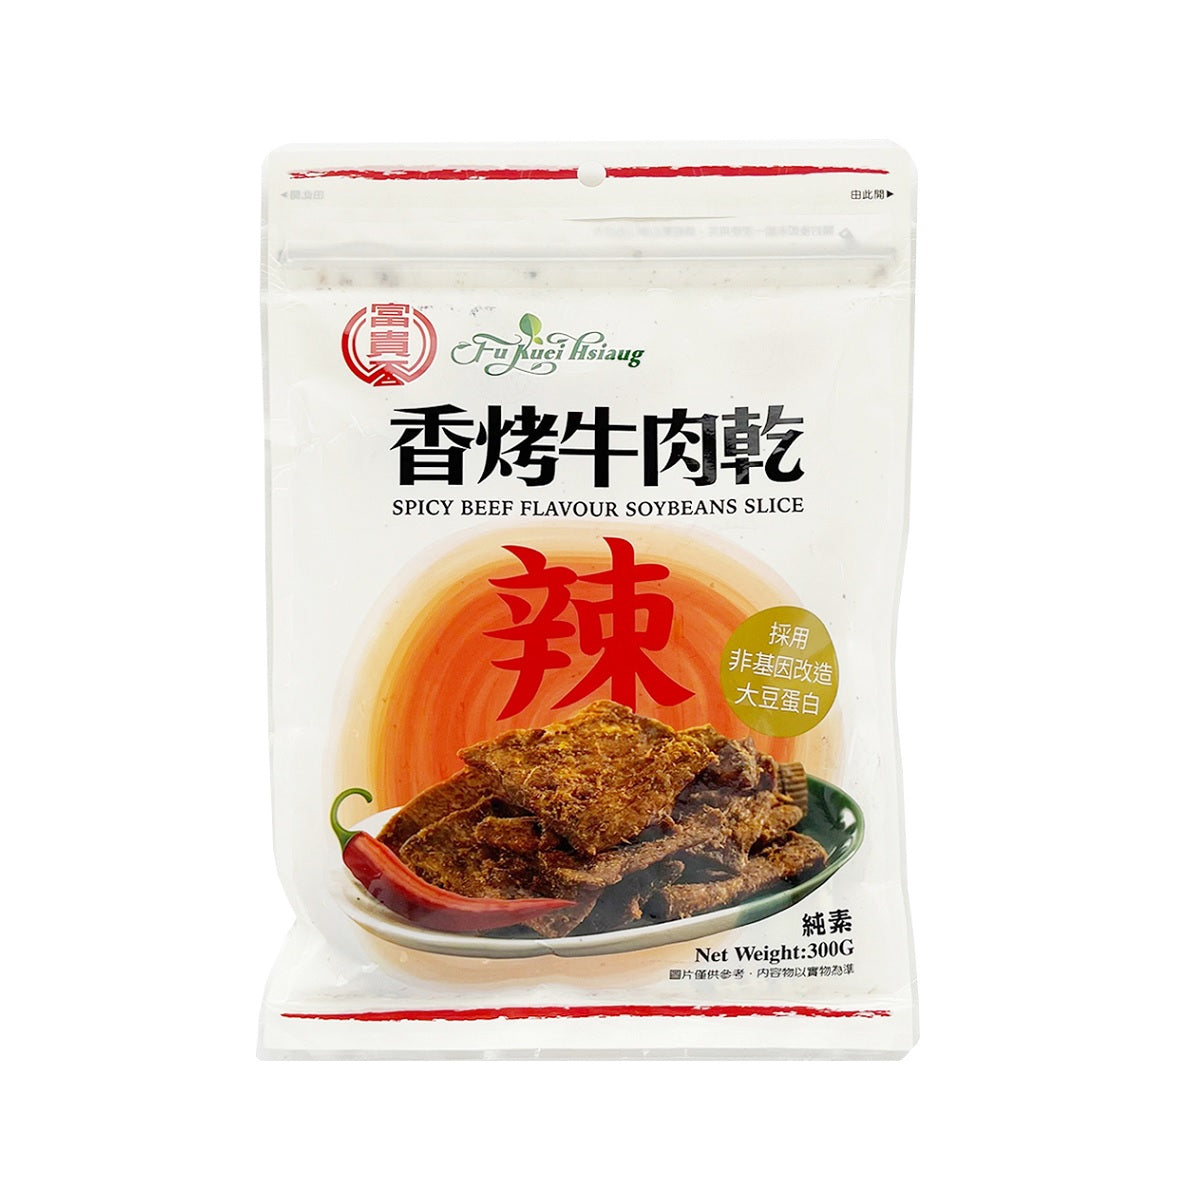 【FU KUEI HSIANG】Spicy Beef Flavour Soybeans Slice (vegan) 300g